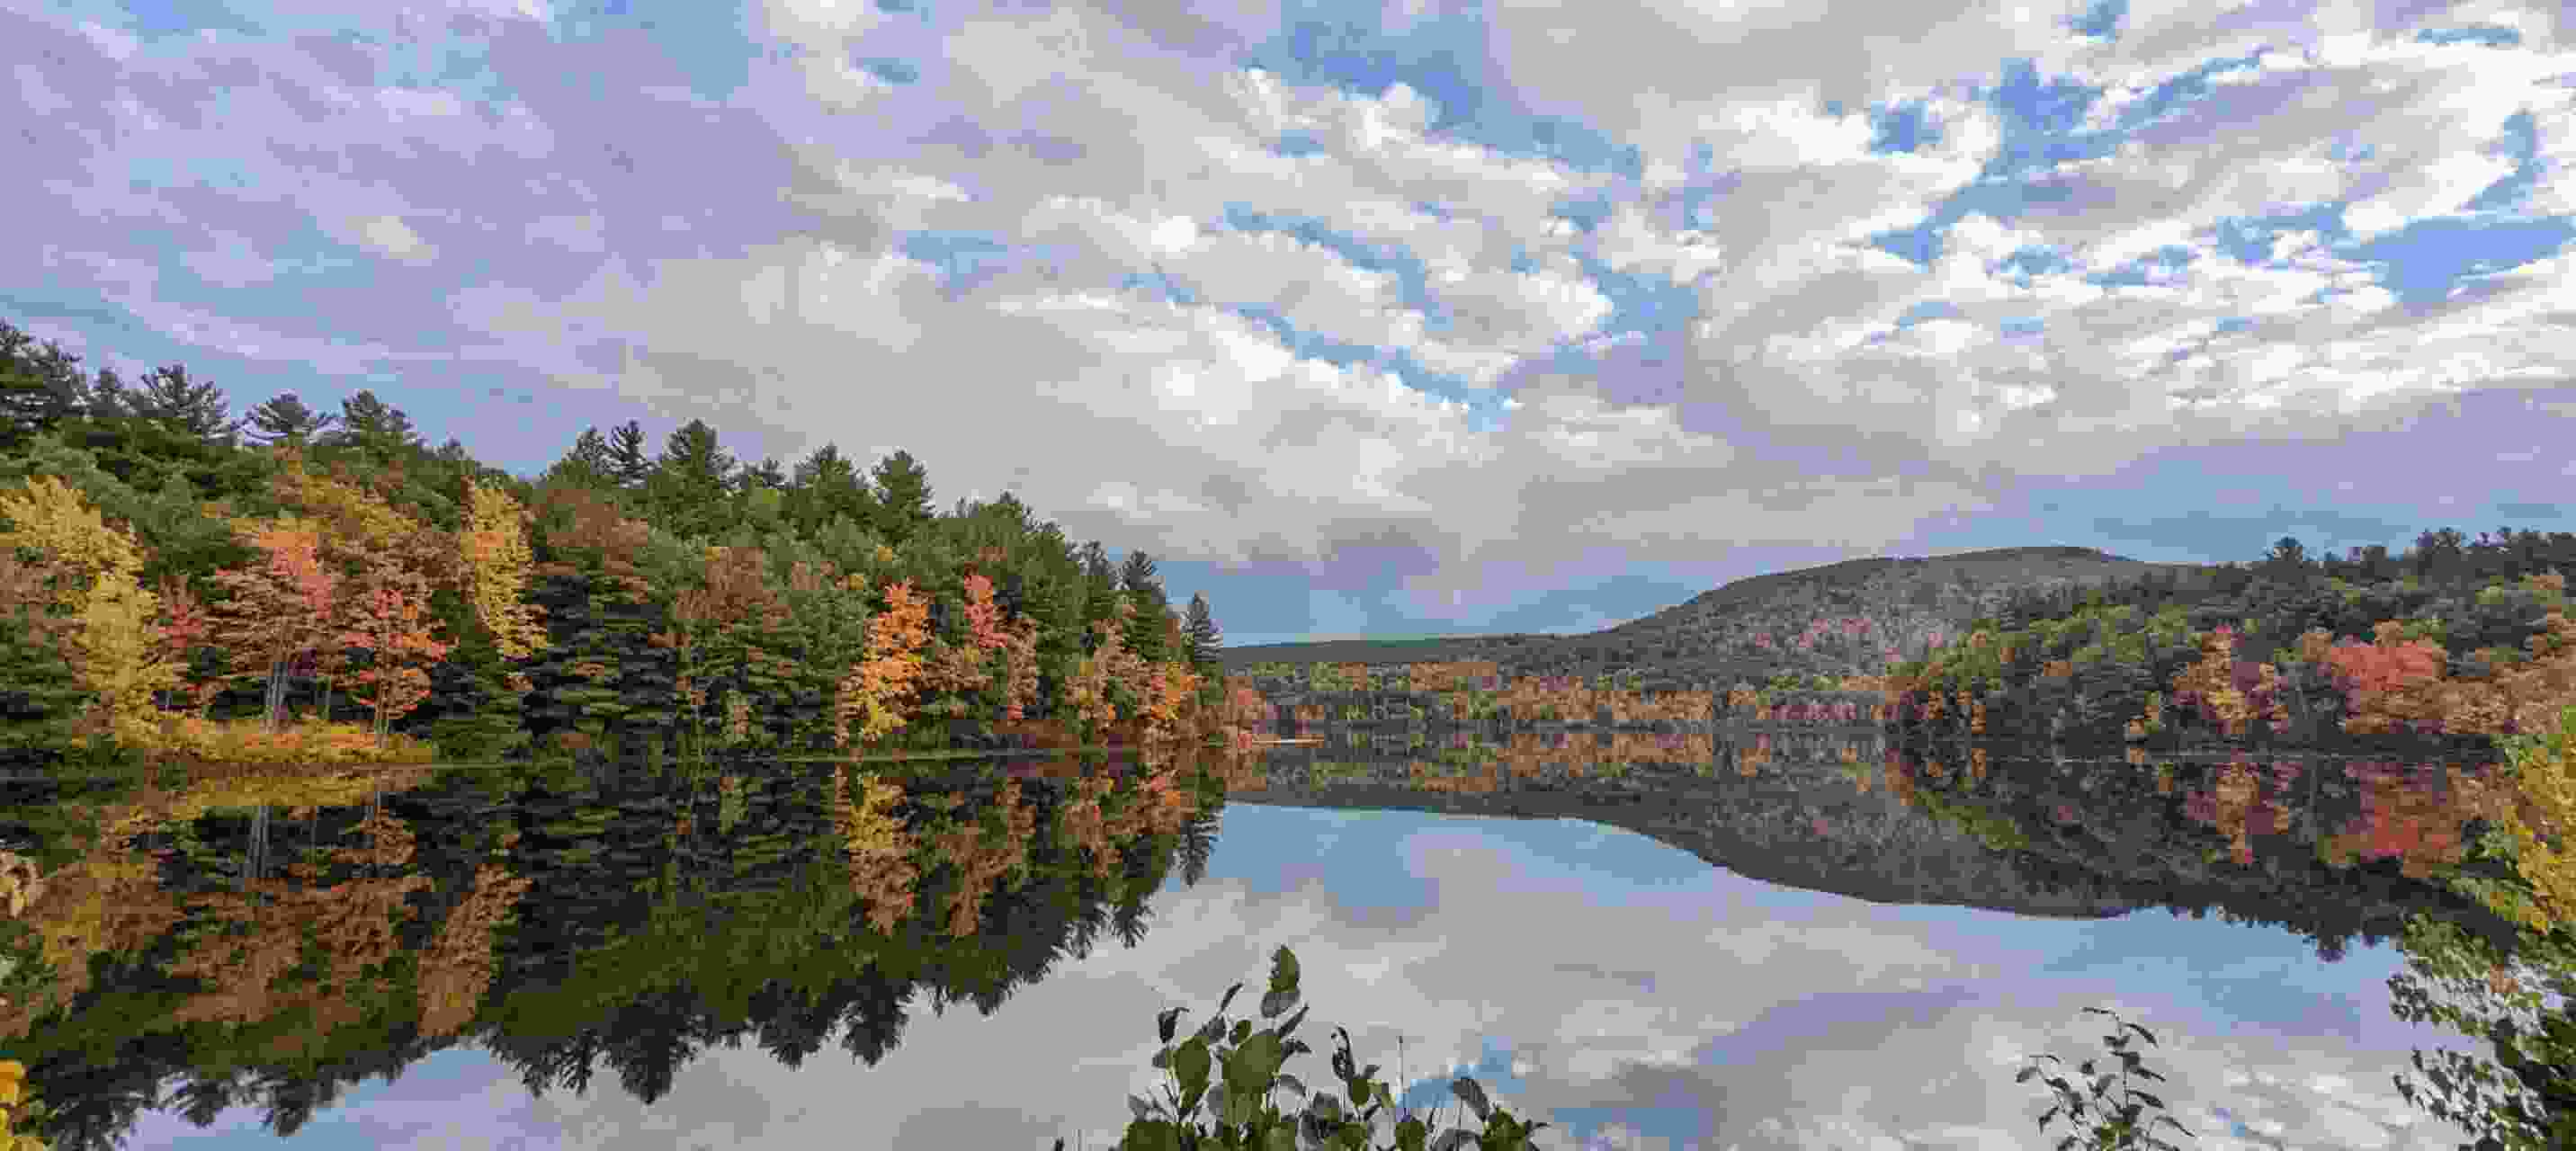 Panoramic view of a lake surrounded by trees with fall foliage and a cloudy blue sky